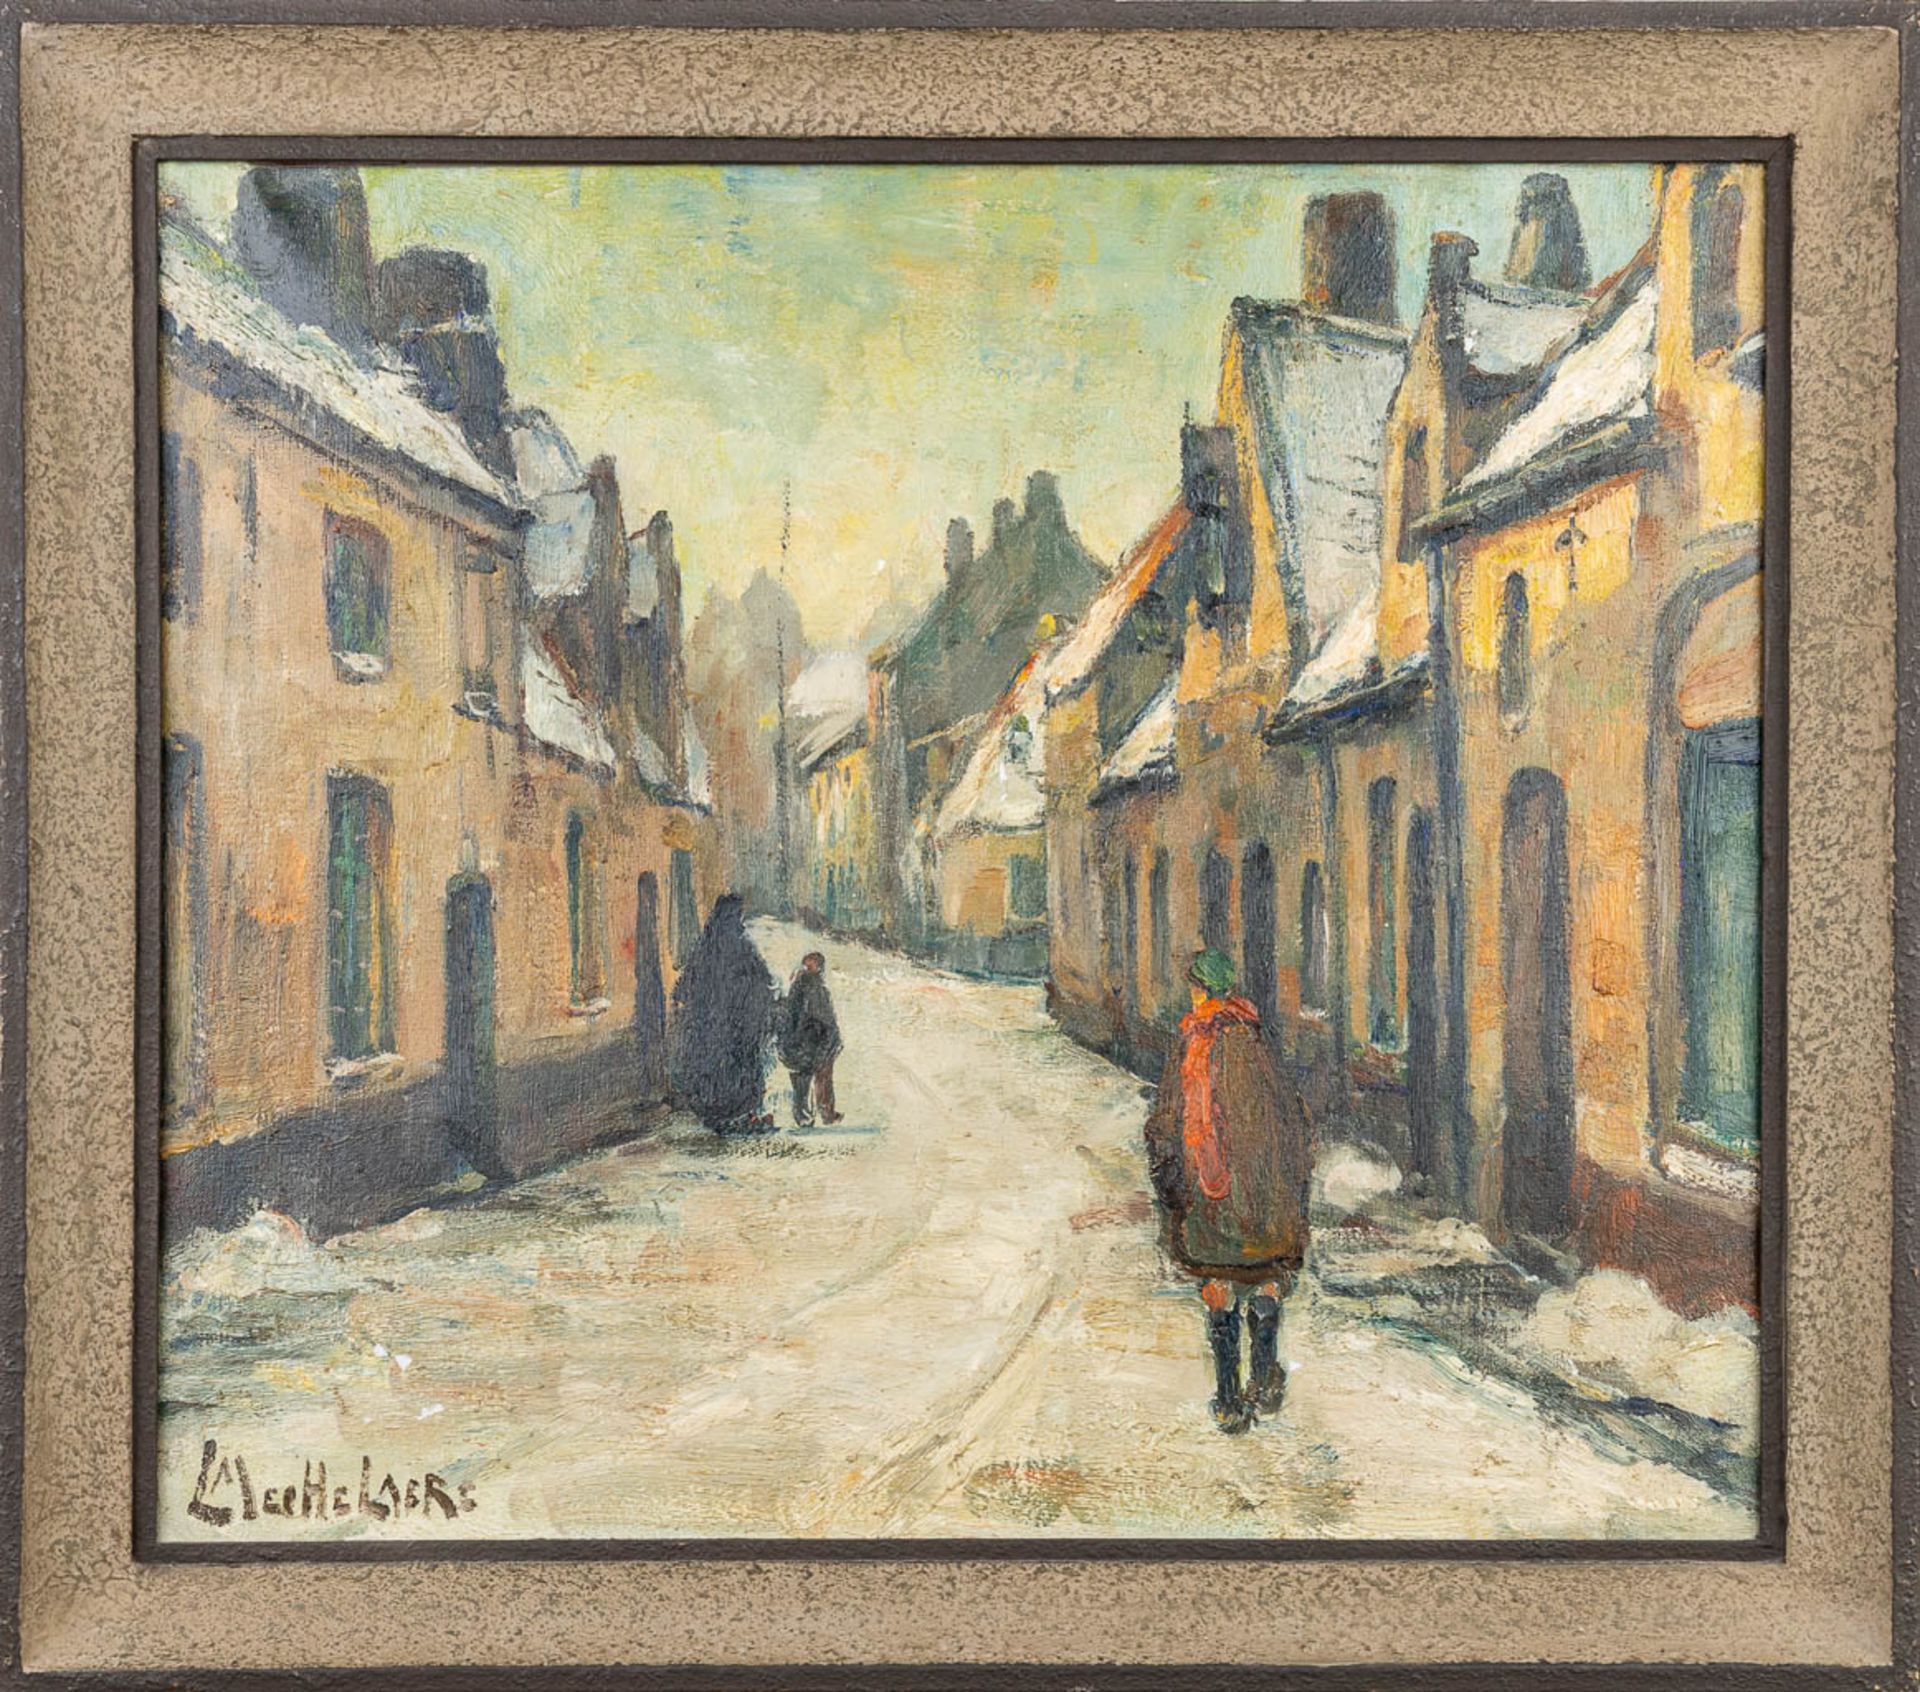 Léon MECHELAERE (1880-1964) 'Bruges' a collection of 2 paintings, oil on canvas. (54 x 74 cm) - Image 12 of 16